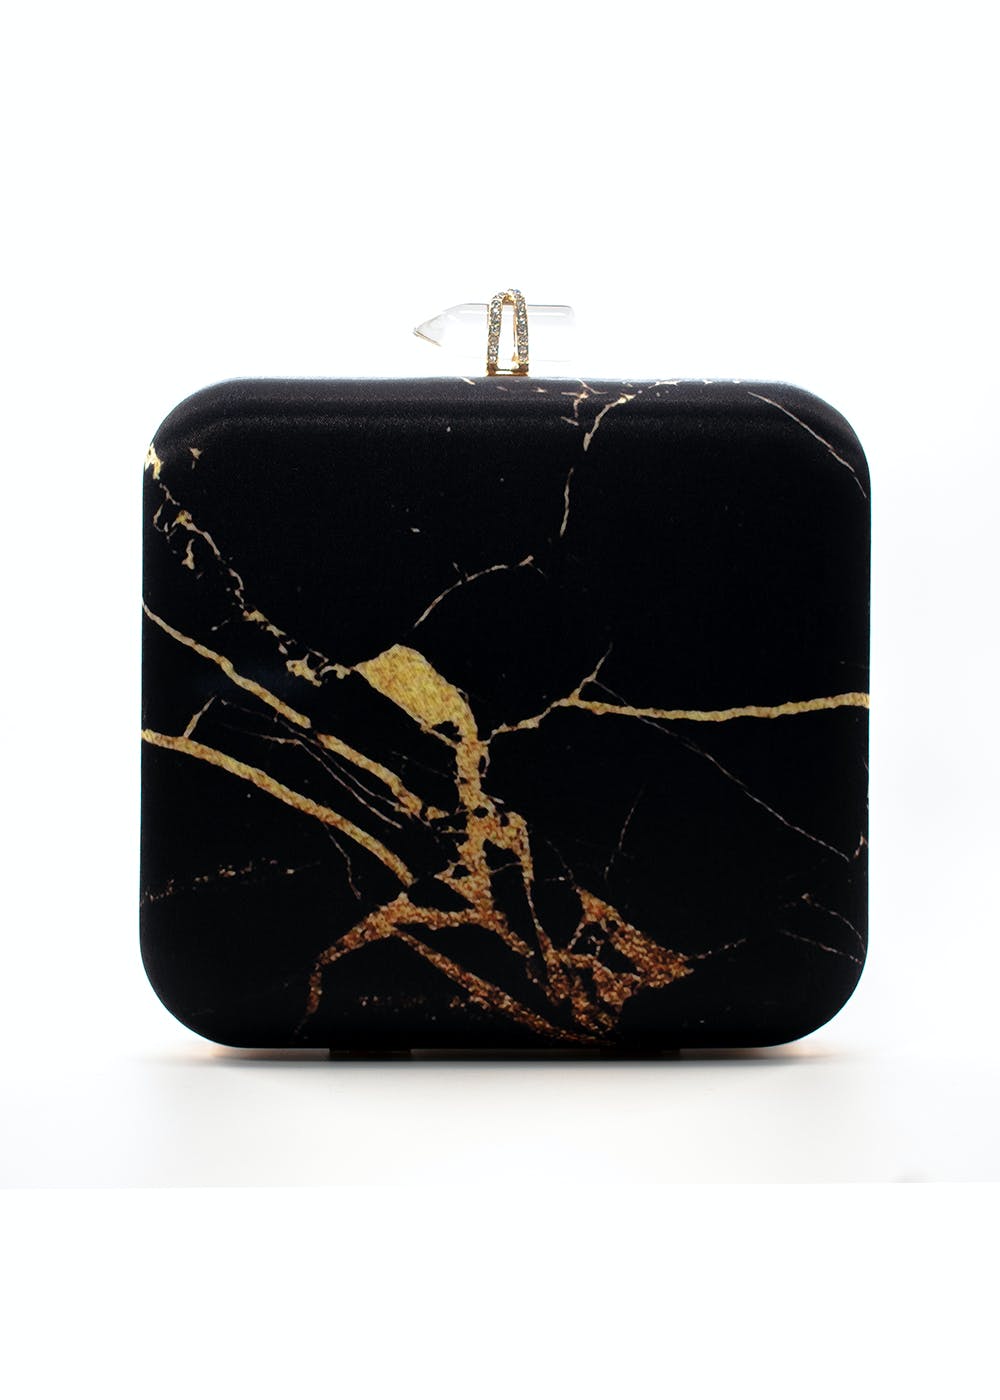 Contrast Marble Effect Black Clutch